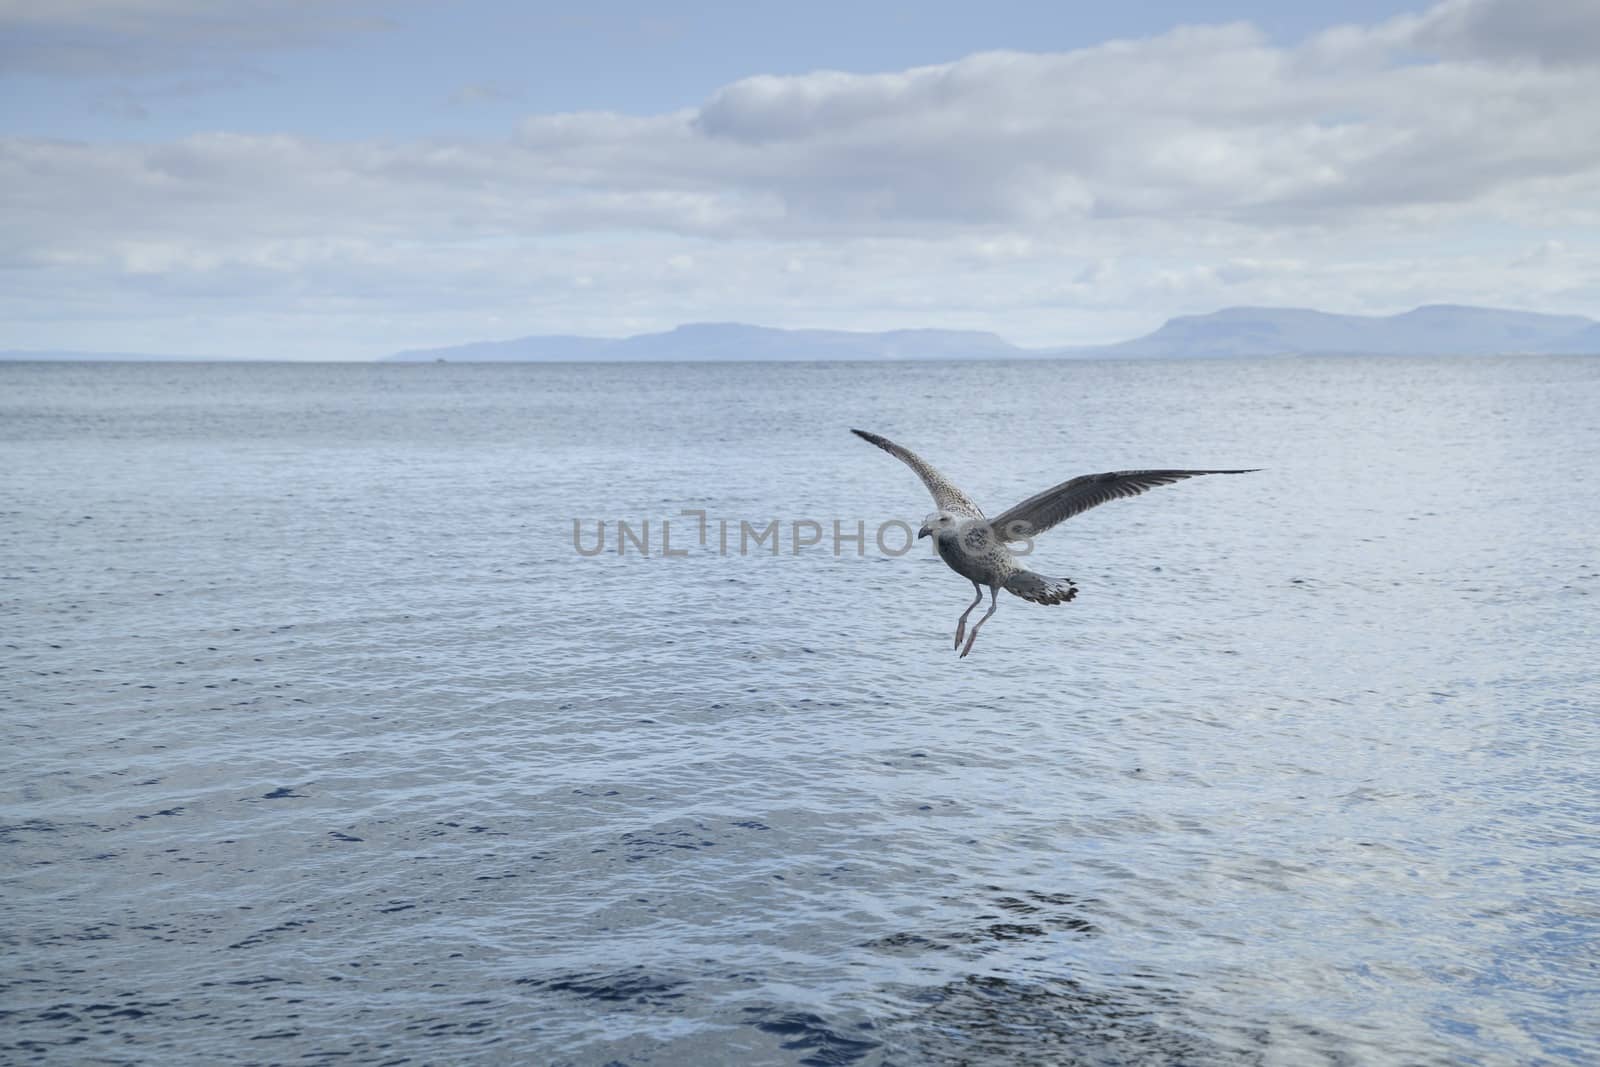 Seagull flying near the surface of the water by MC2000